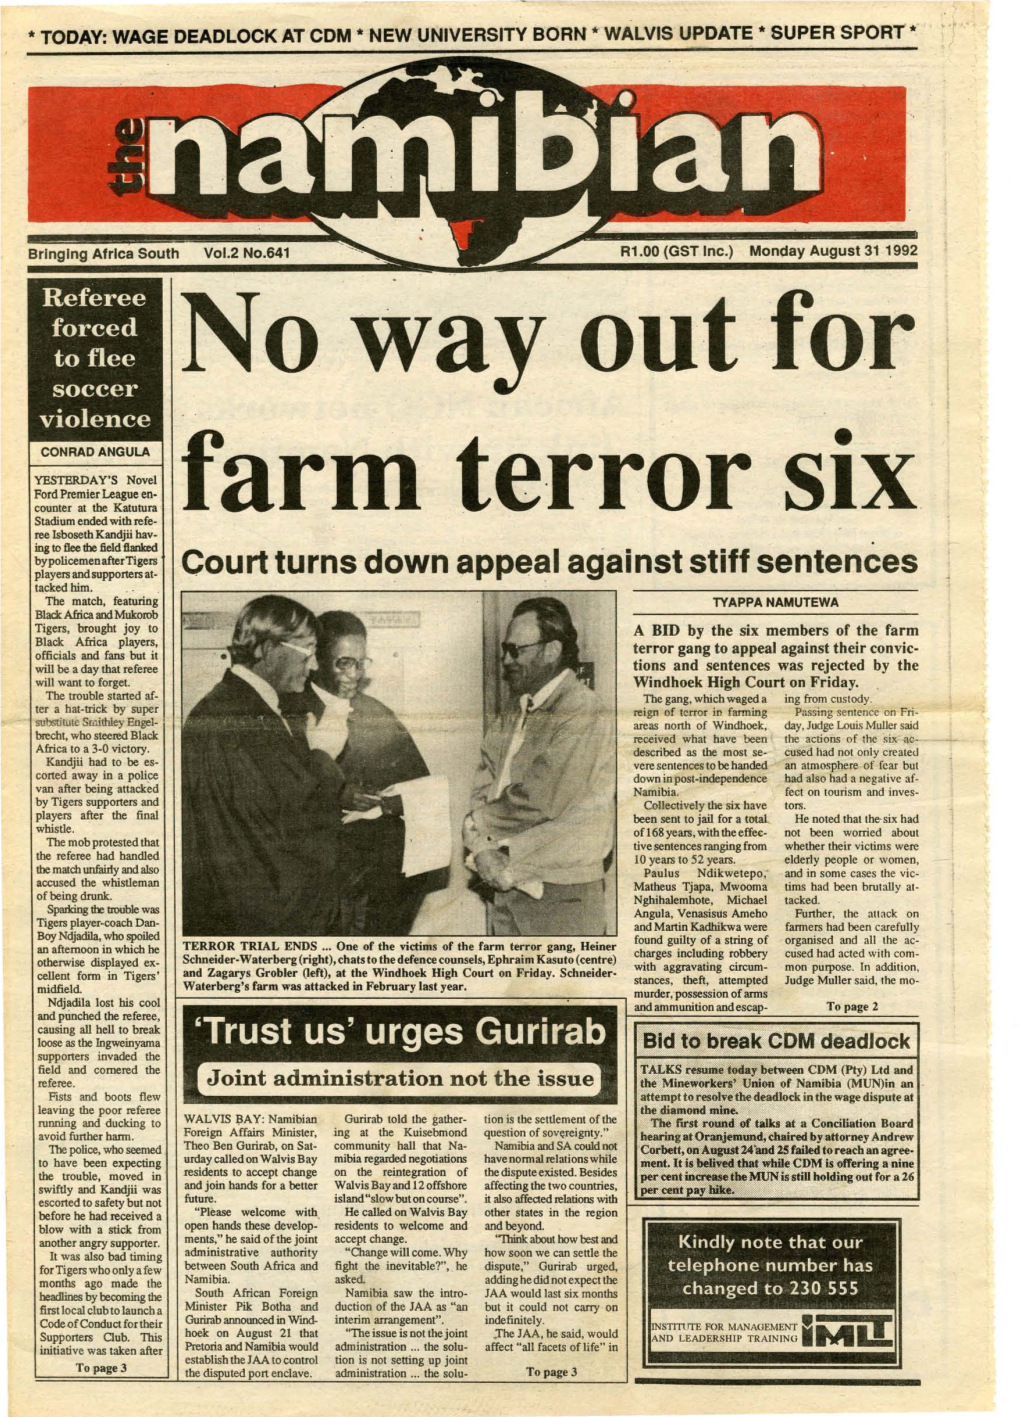 31 August 1992